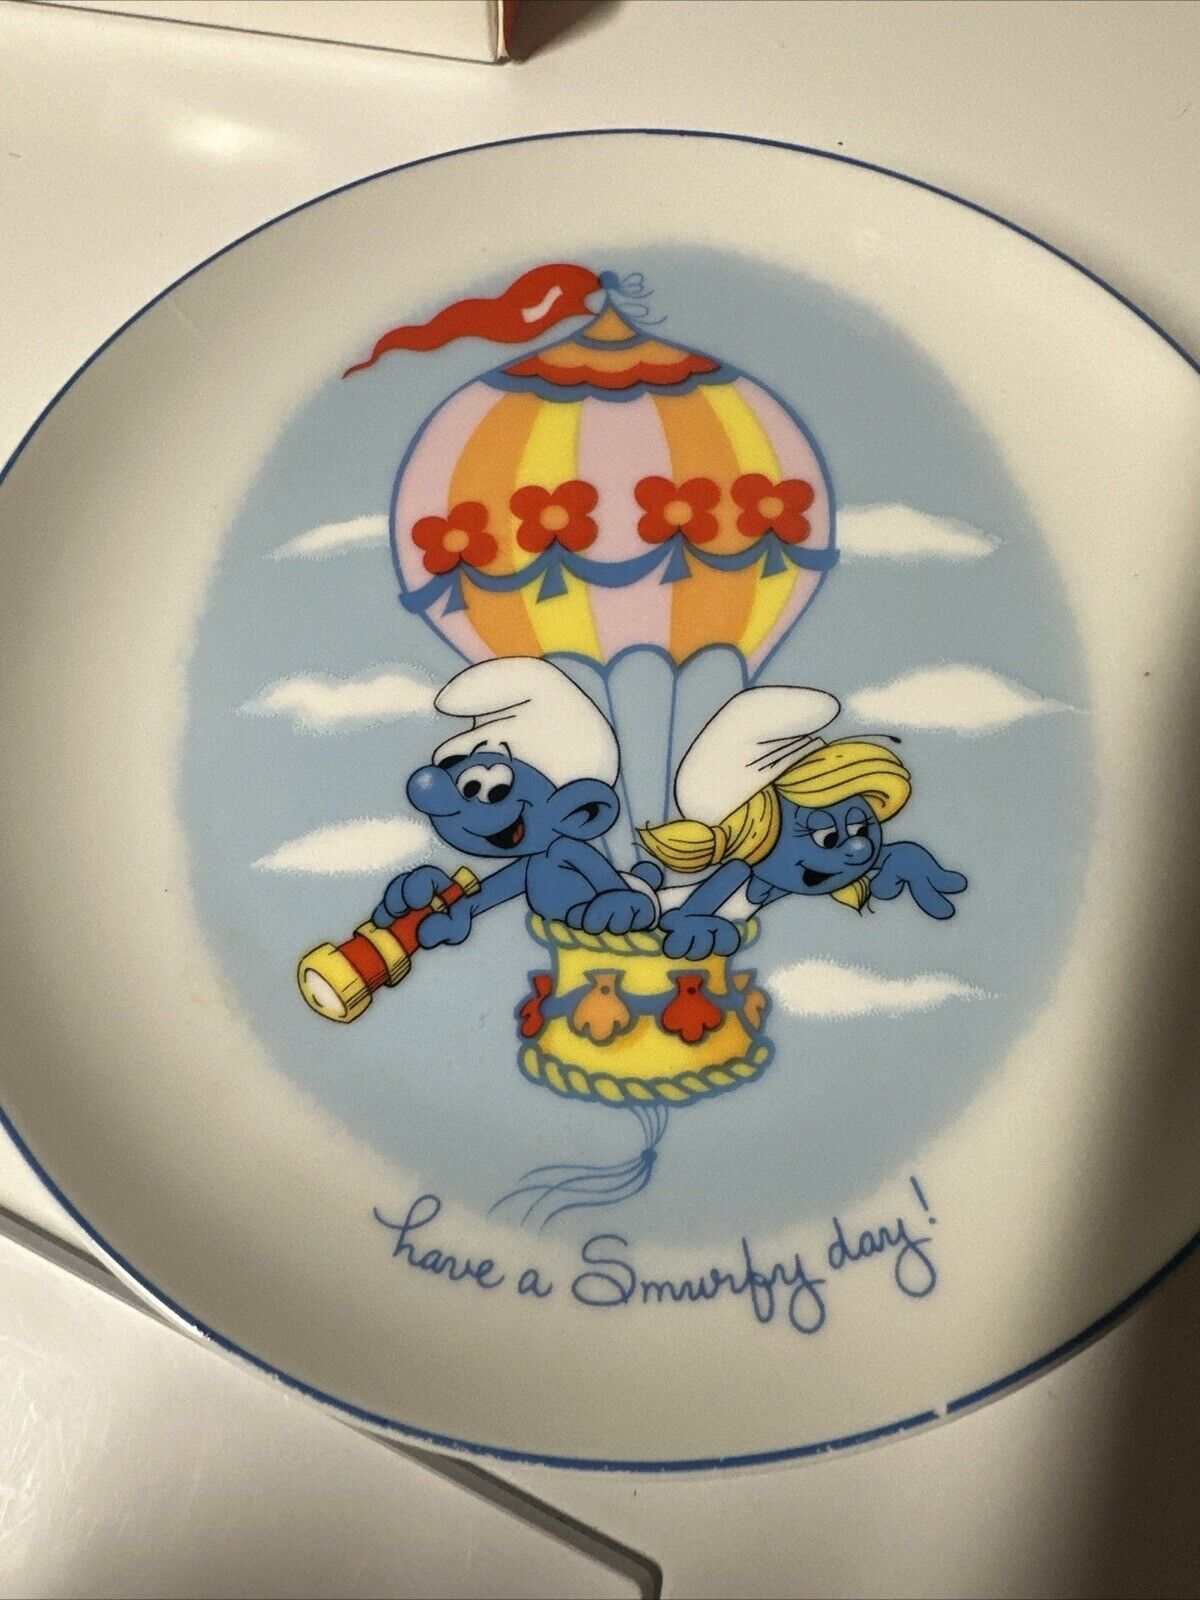 Vintage SMURF Have a Smurfy Day Porcelain Plate SMURFETTE Wallace Berrie 1982